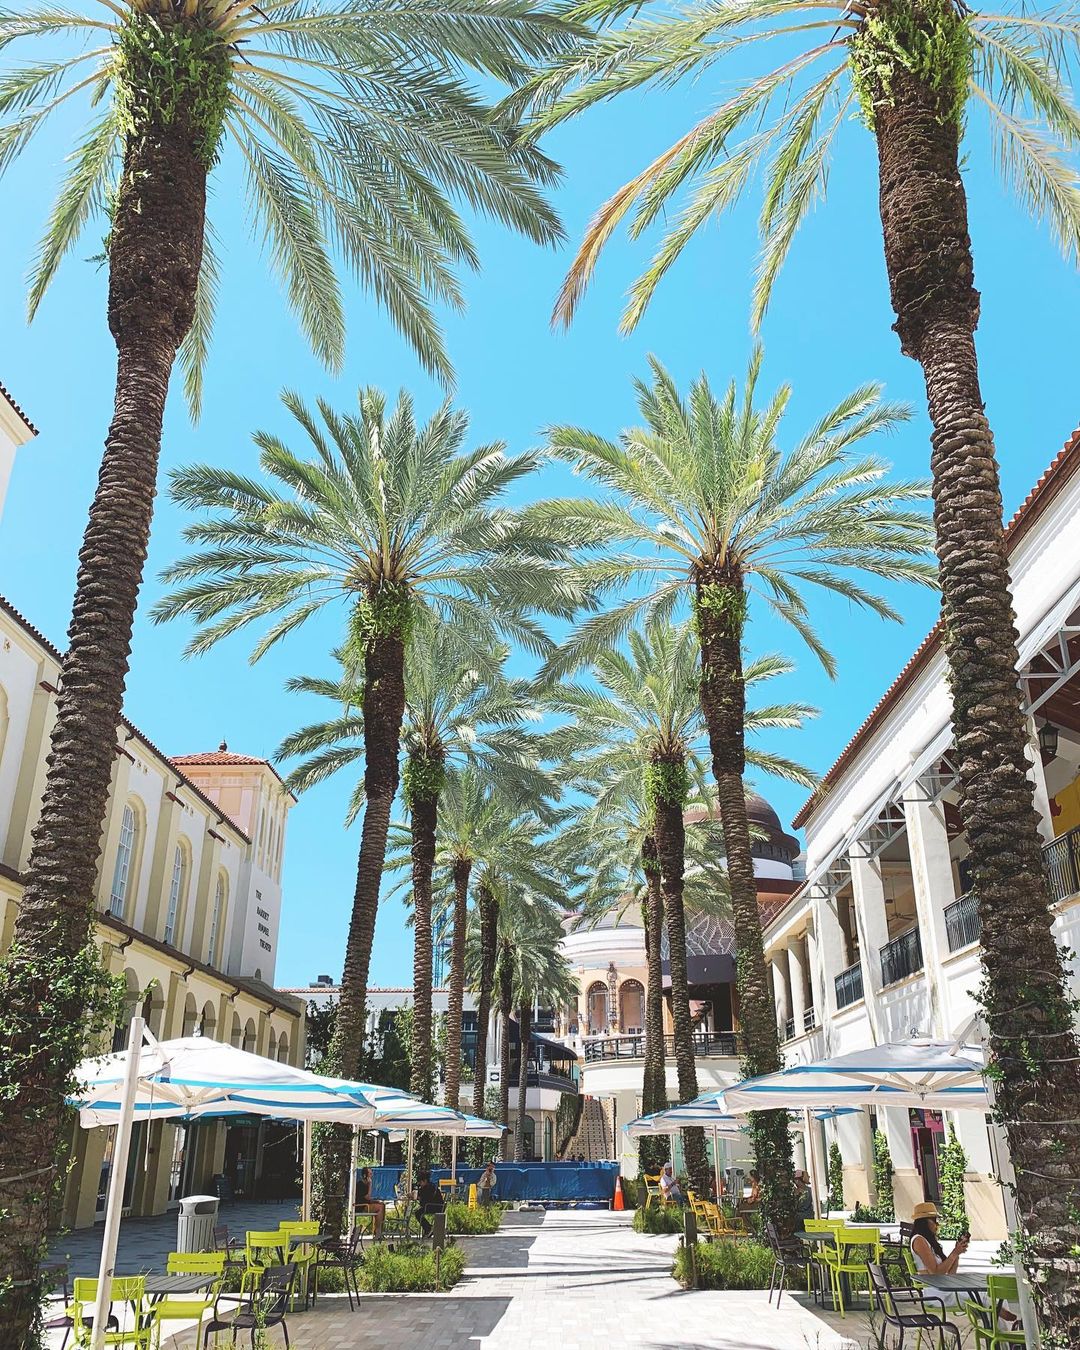 Photo of the Palm Trees in Rosemary Square in West Palm Beach. Photo by Instagram user @thewanderingconk